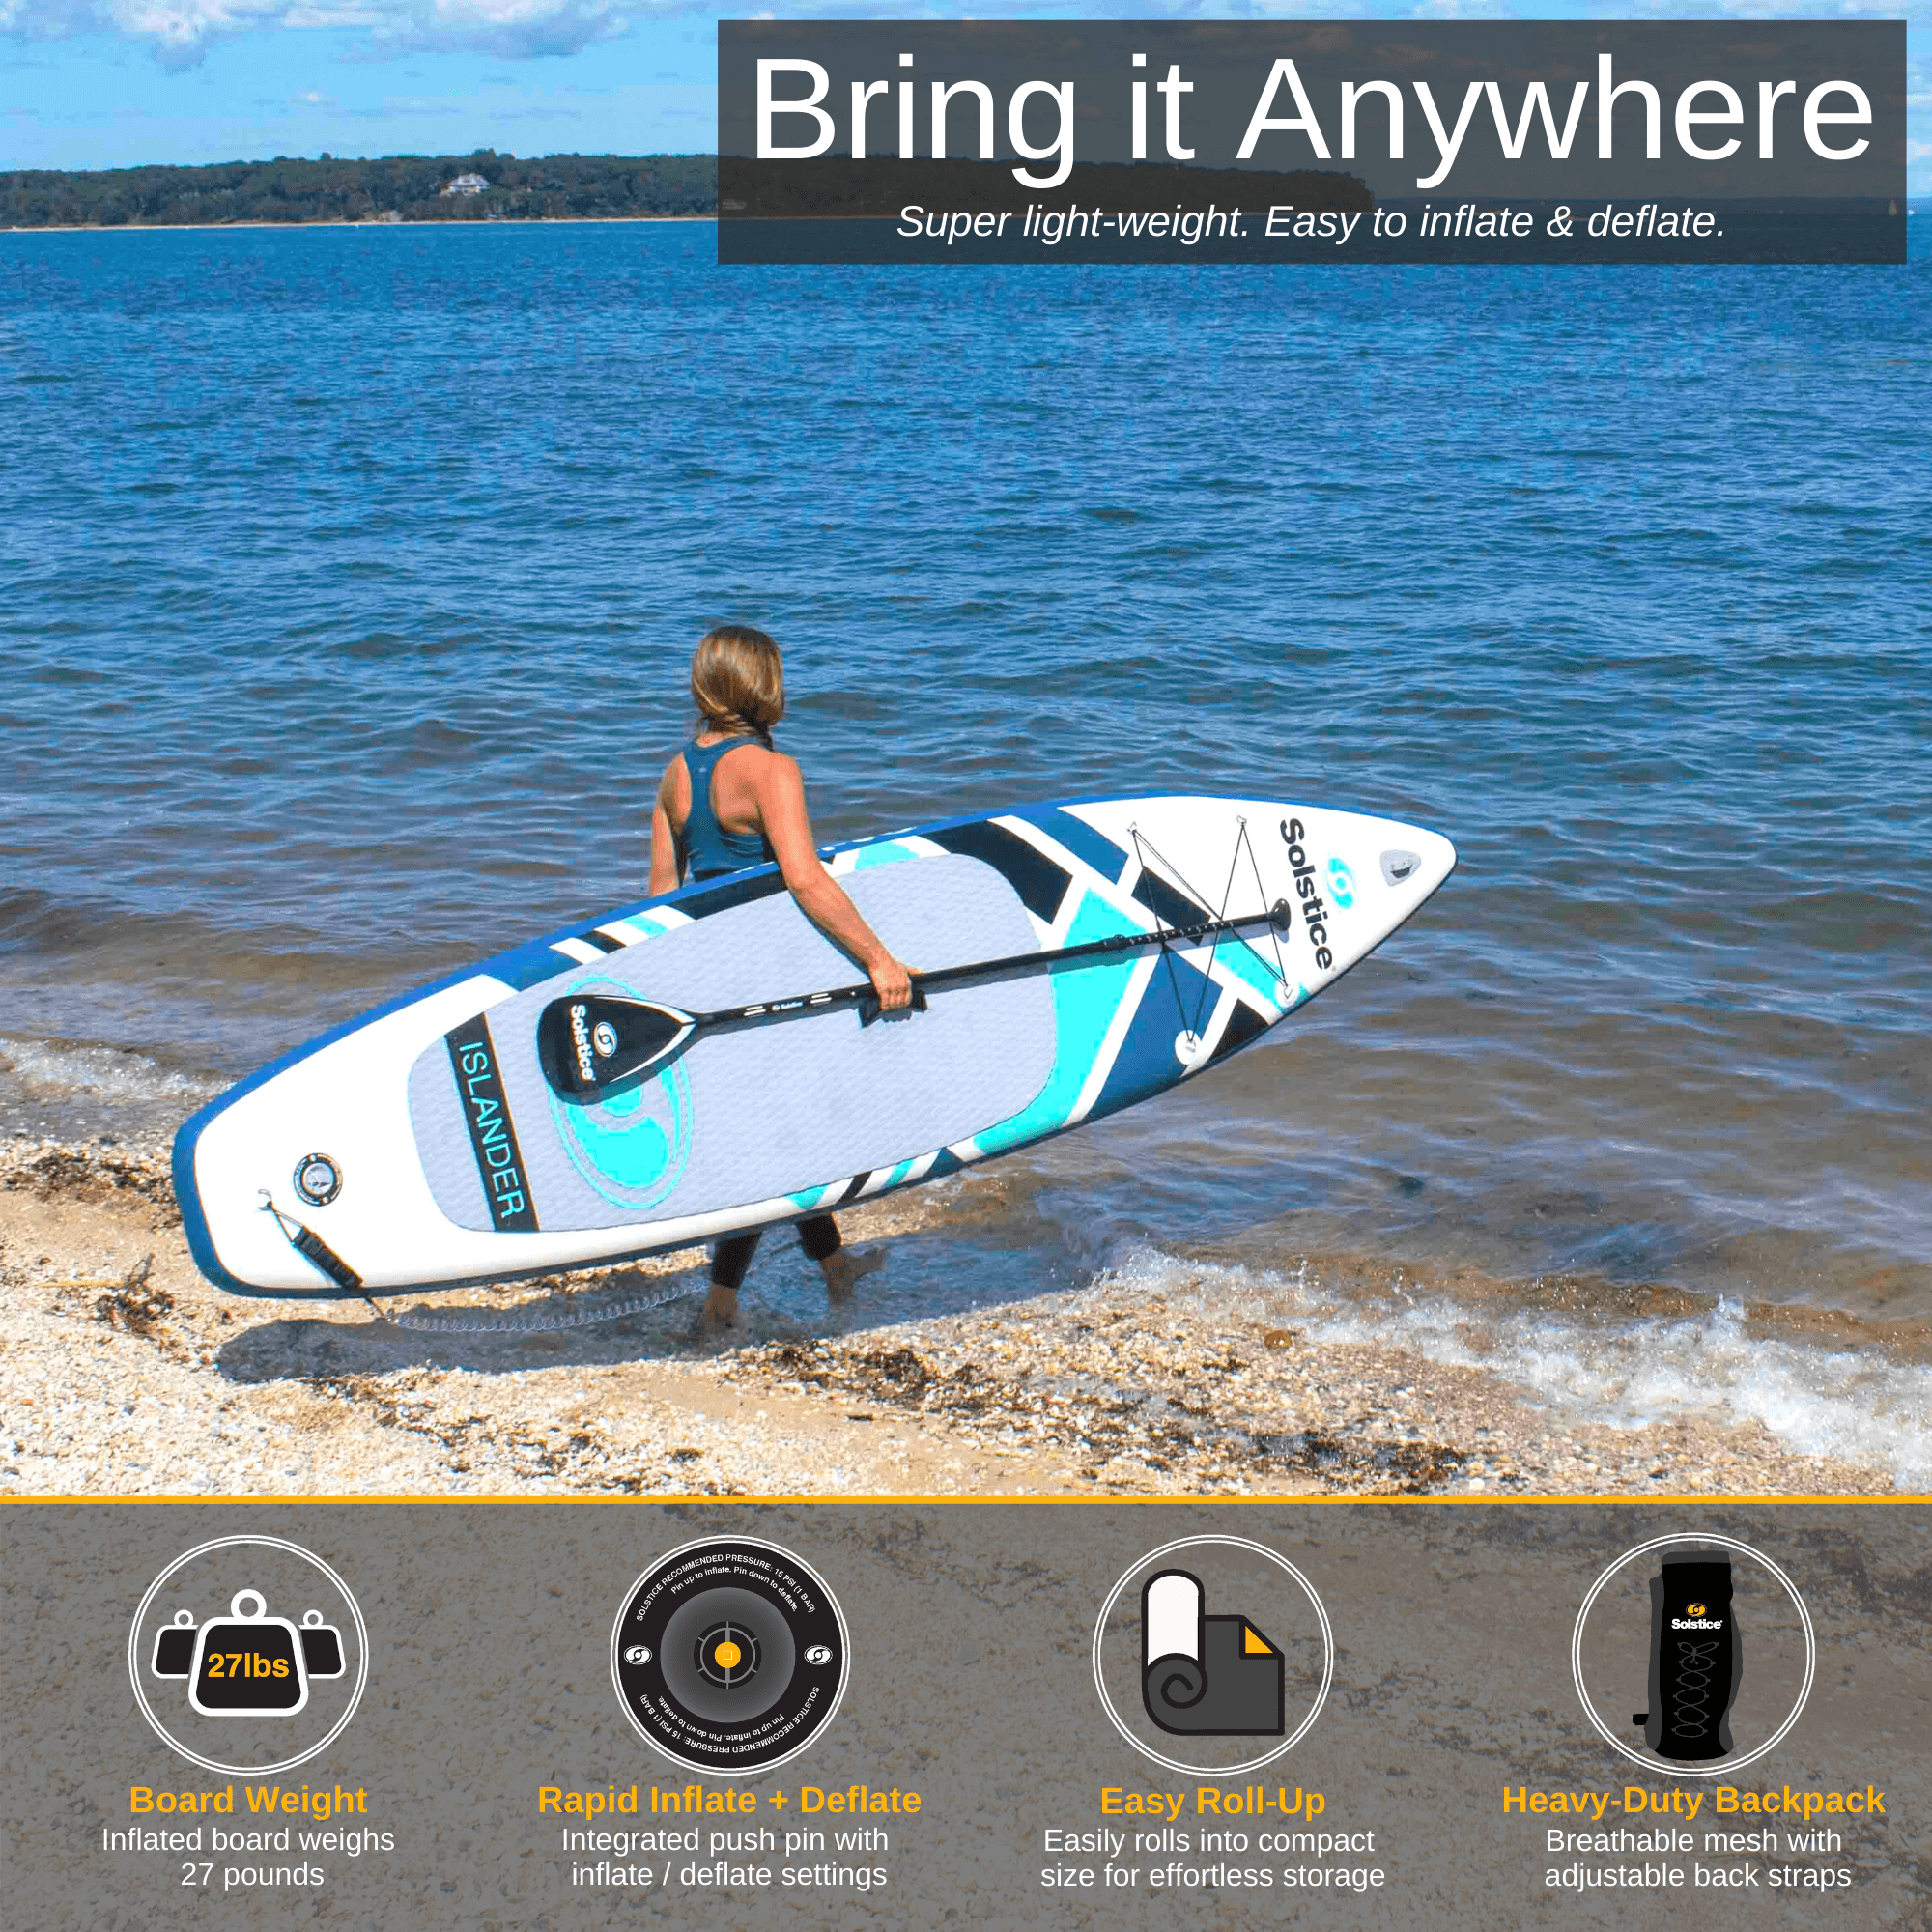 Solstice Islander Inflatable Stand Up Paddle Board Kit